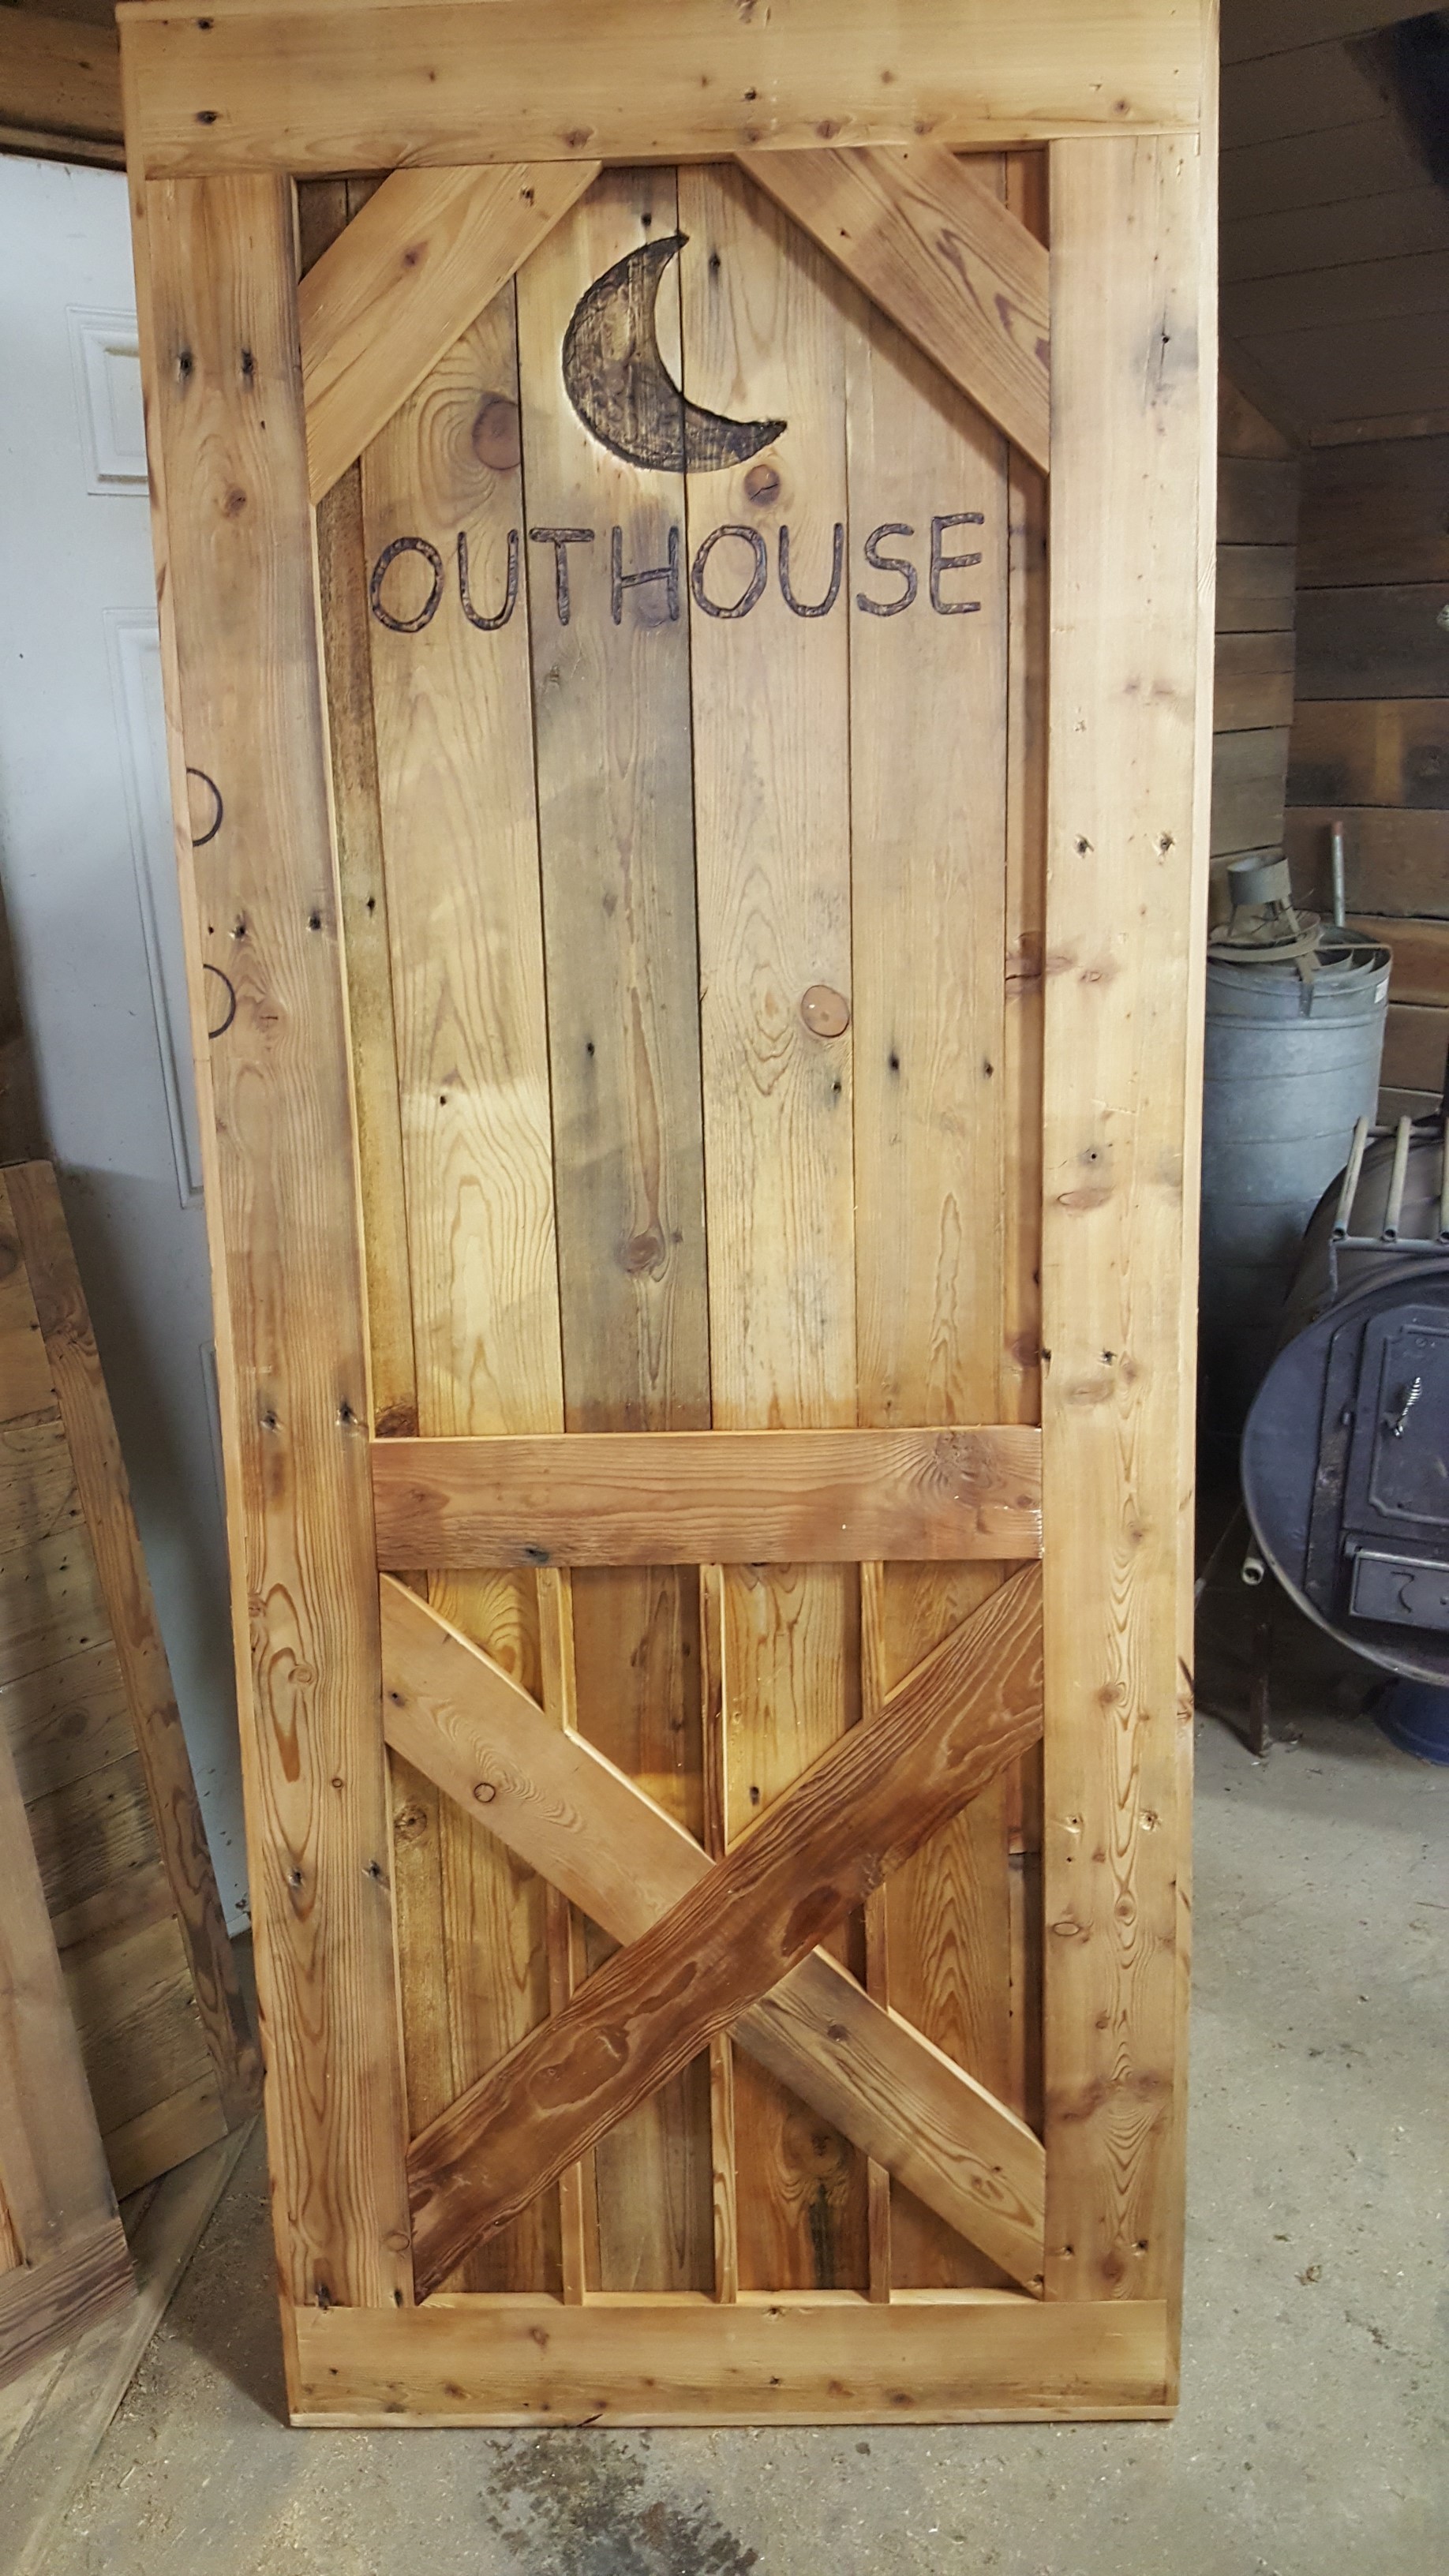 Outhouse door photo